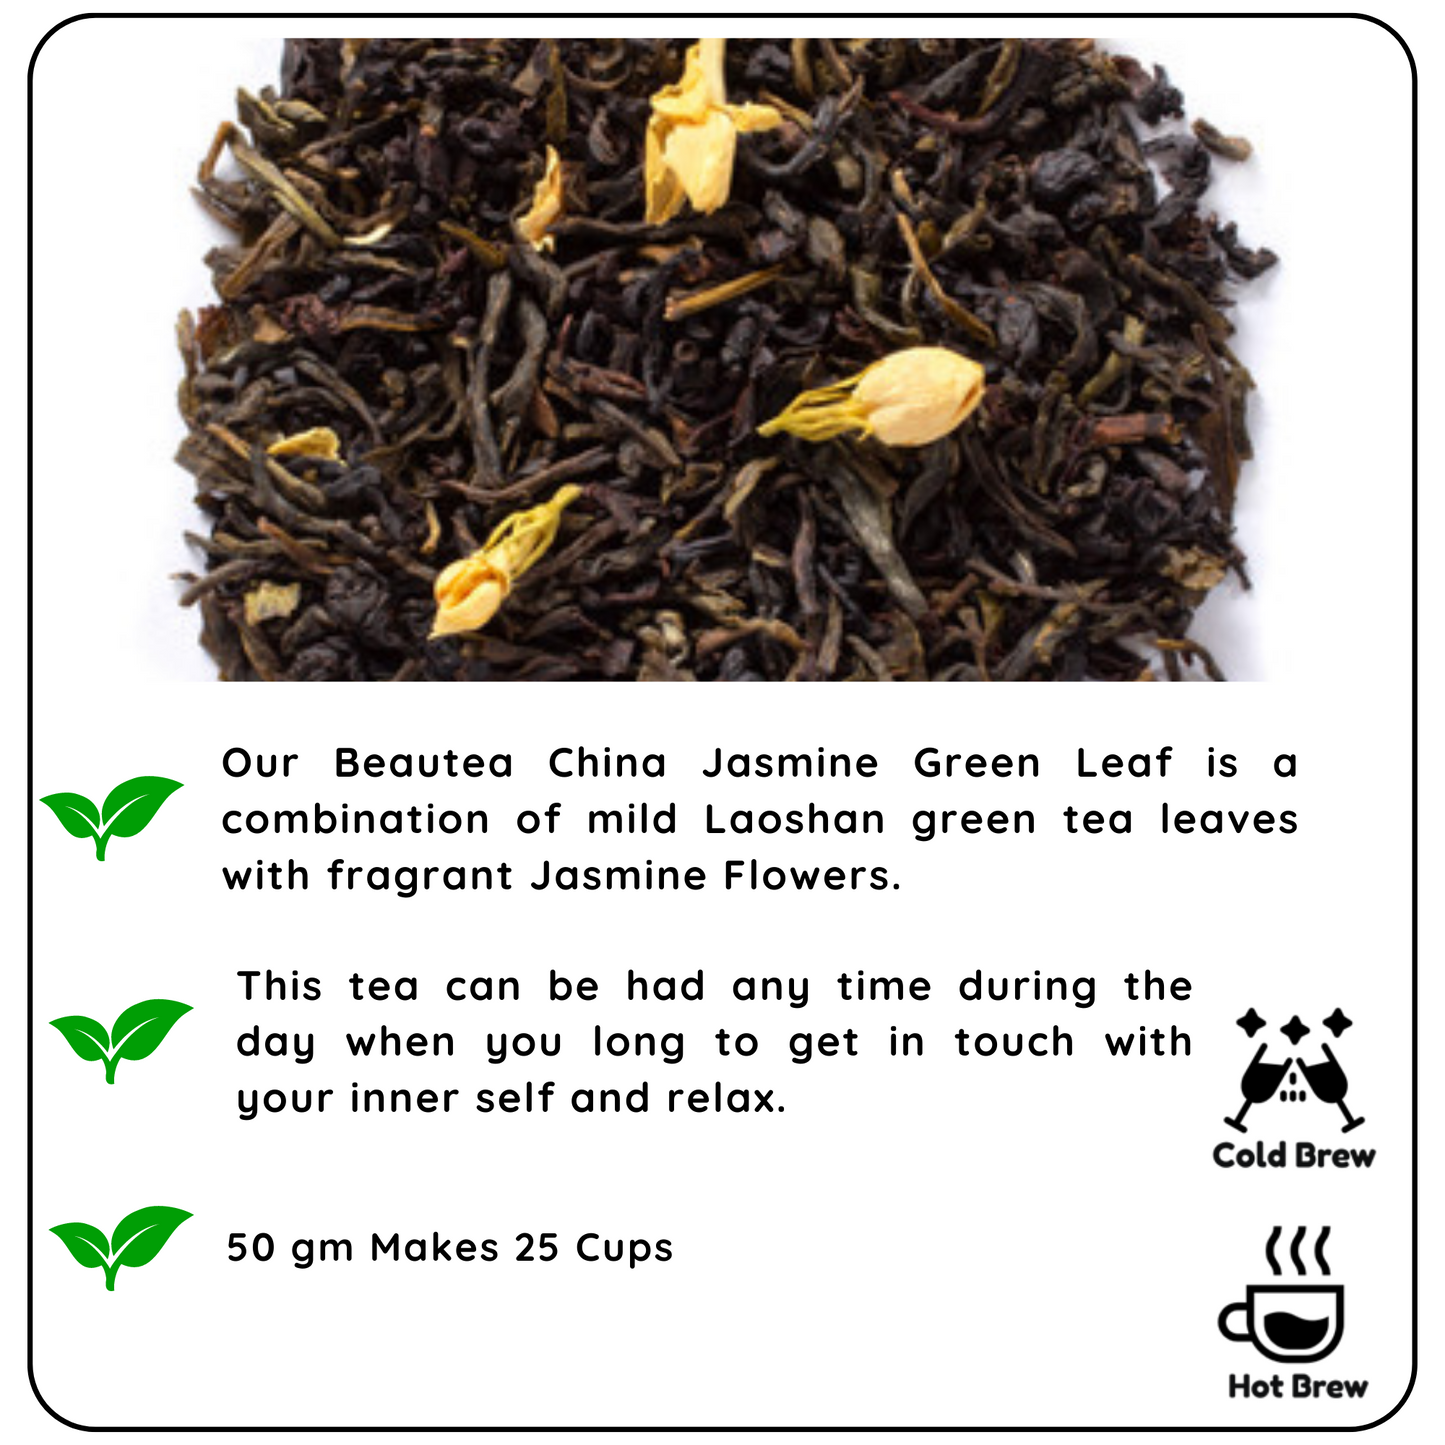 BEAUTEA China Jasmine Green Leaf - The secret to your well-being with its fragrant and nourishing qualities - Radhikas Fine Teas and Whatnots